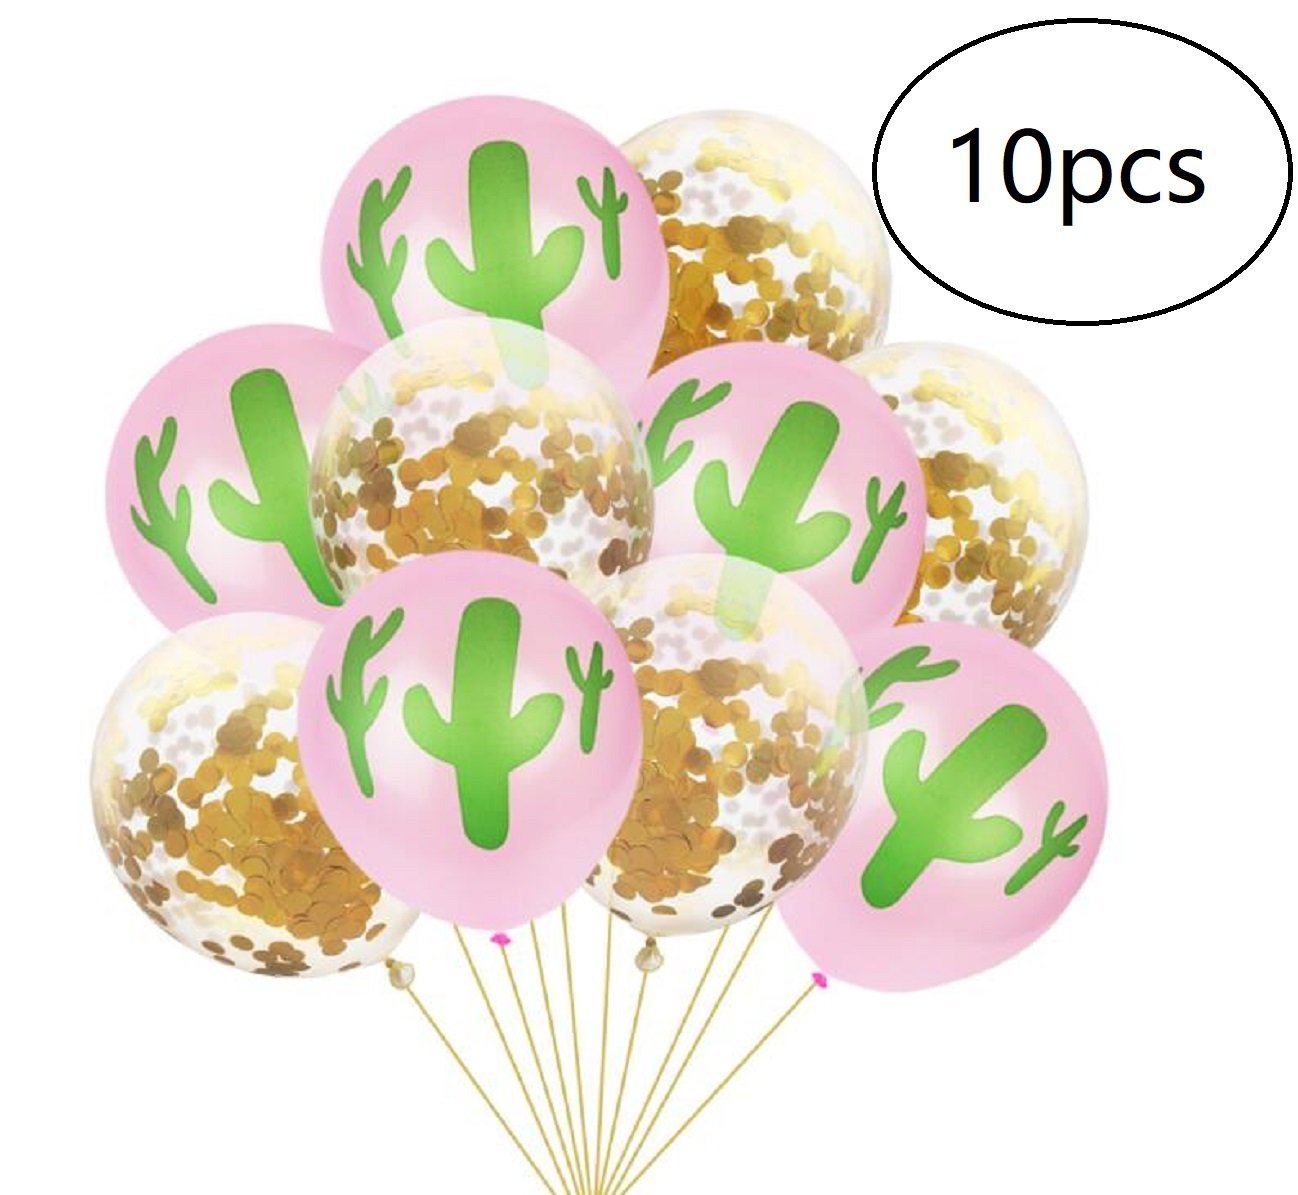 EBTOYS 10pcs Cactus Party Balloons Latex Balloons Confetti Balloons for  Summer Theme Party Decorations,10in.